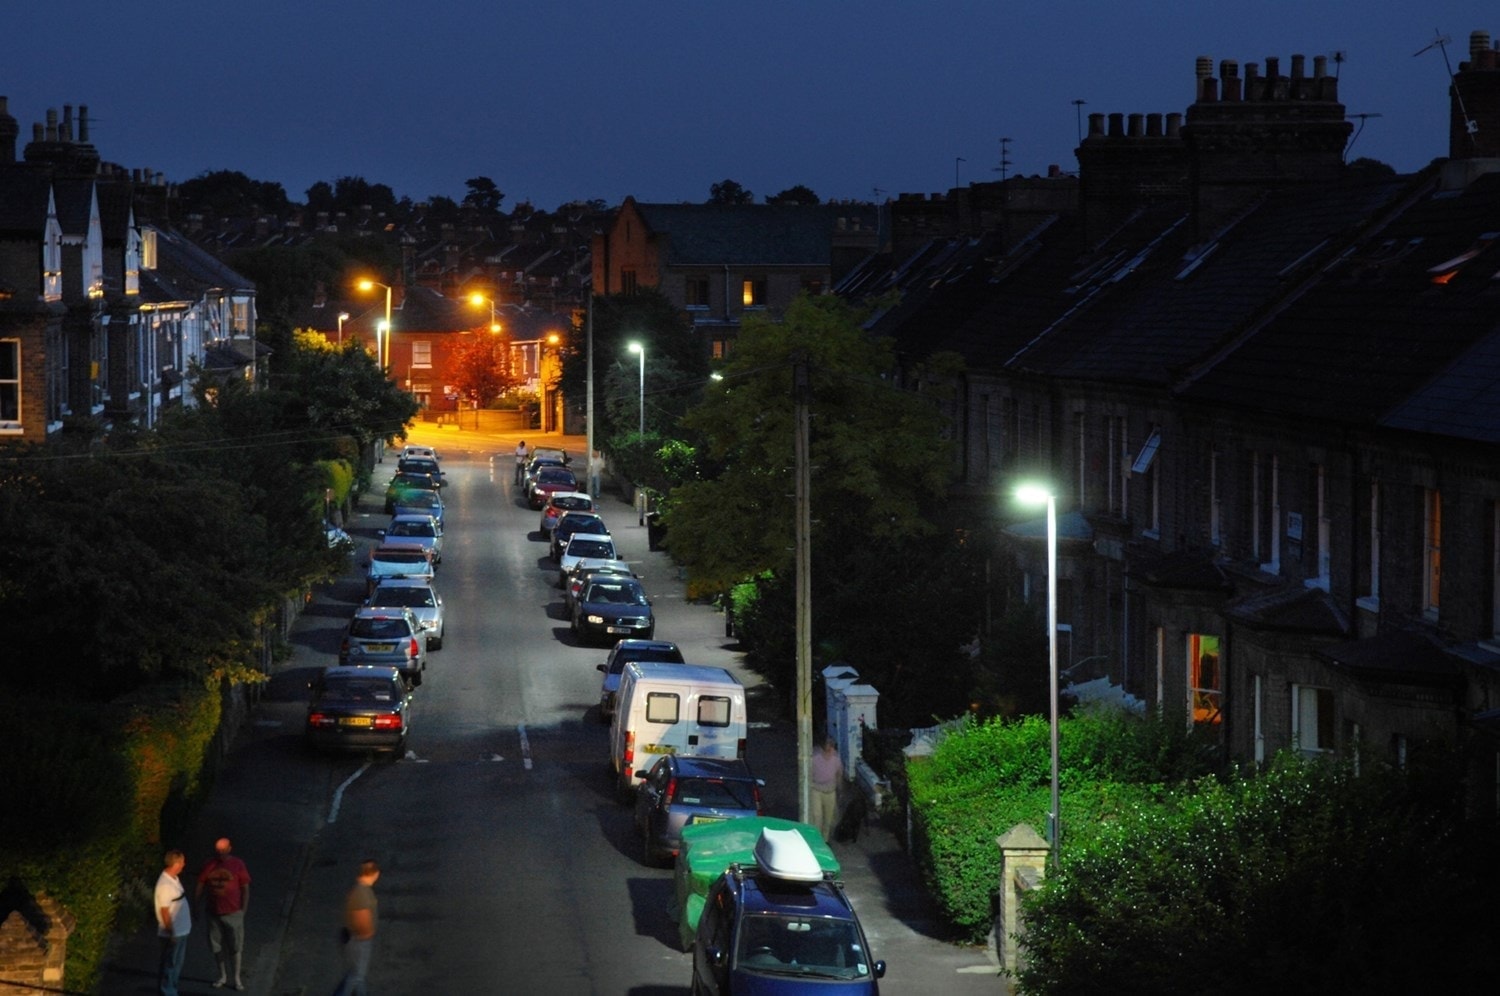 street lighting in manchester to be upgraded to LED technology